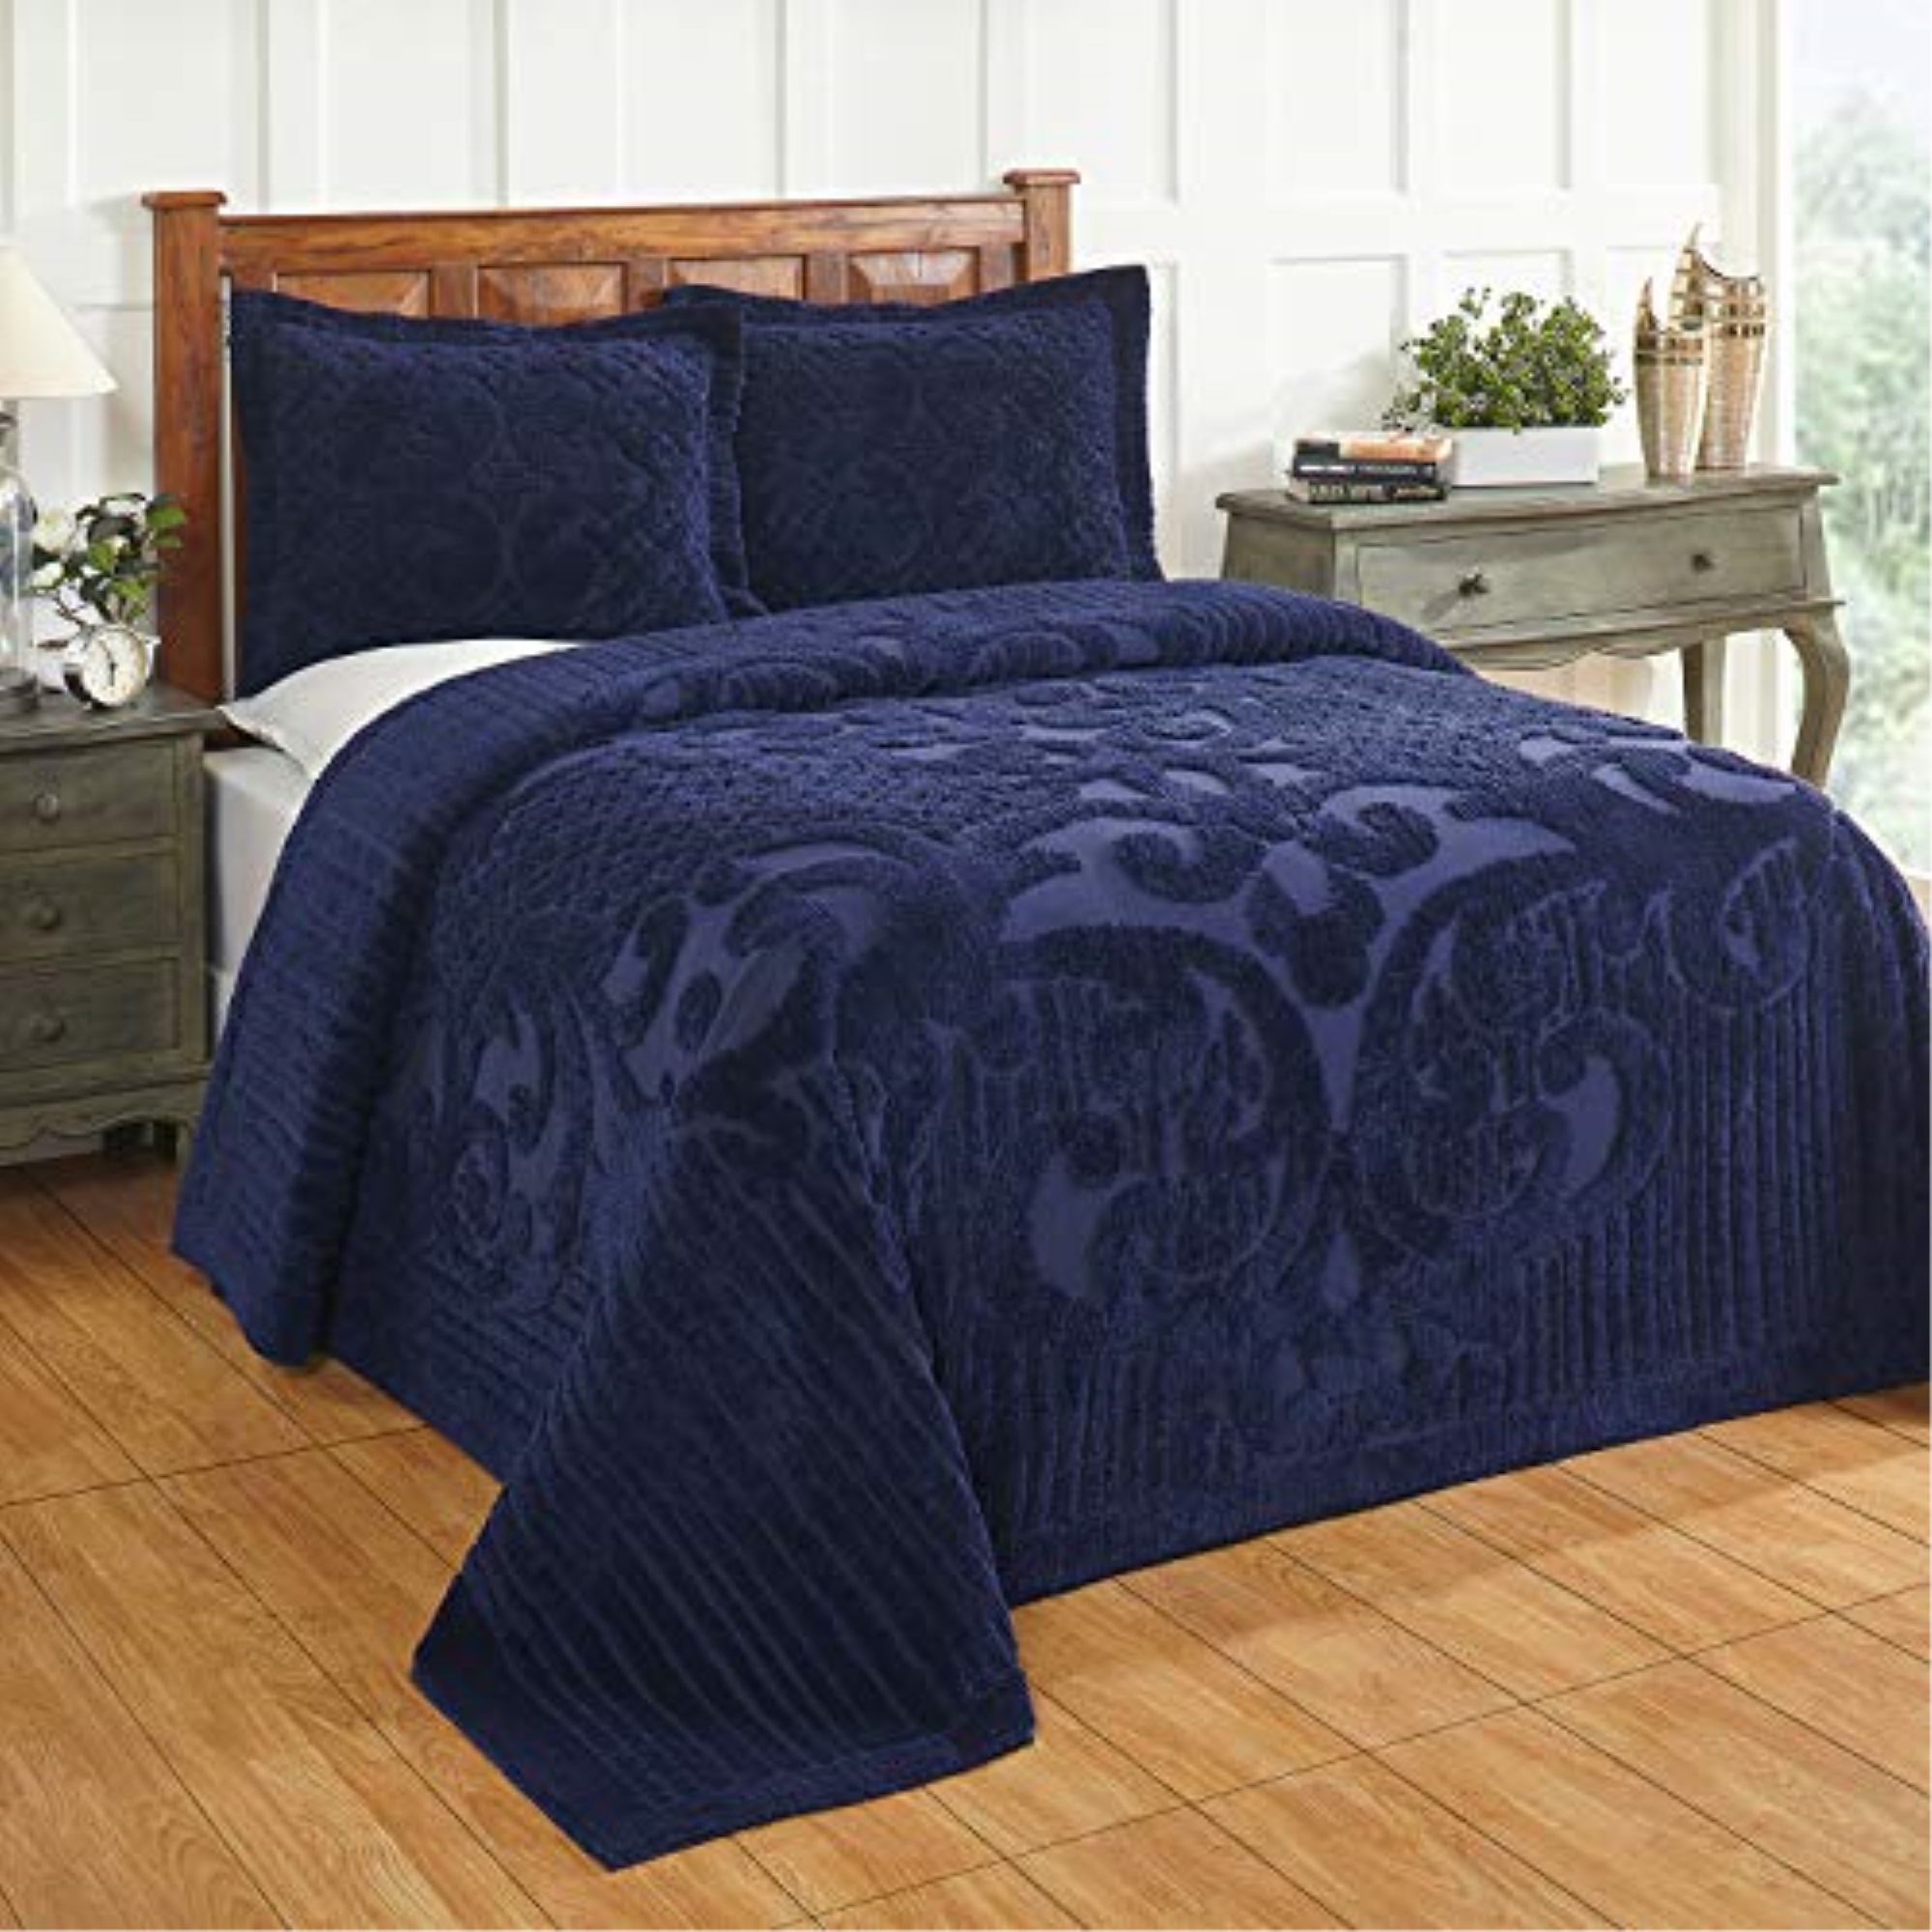 Better Trends Ashton Collection Queen Bedspread in Navy